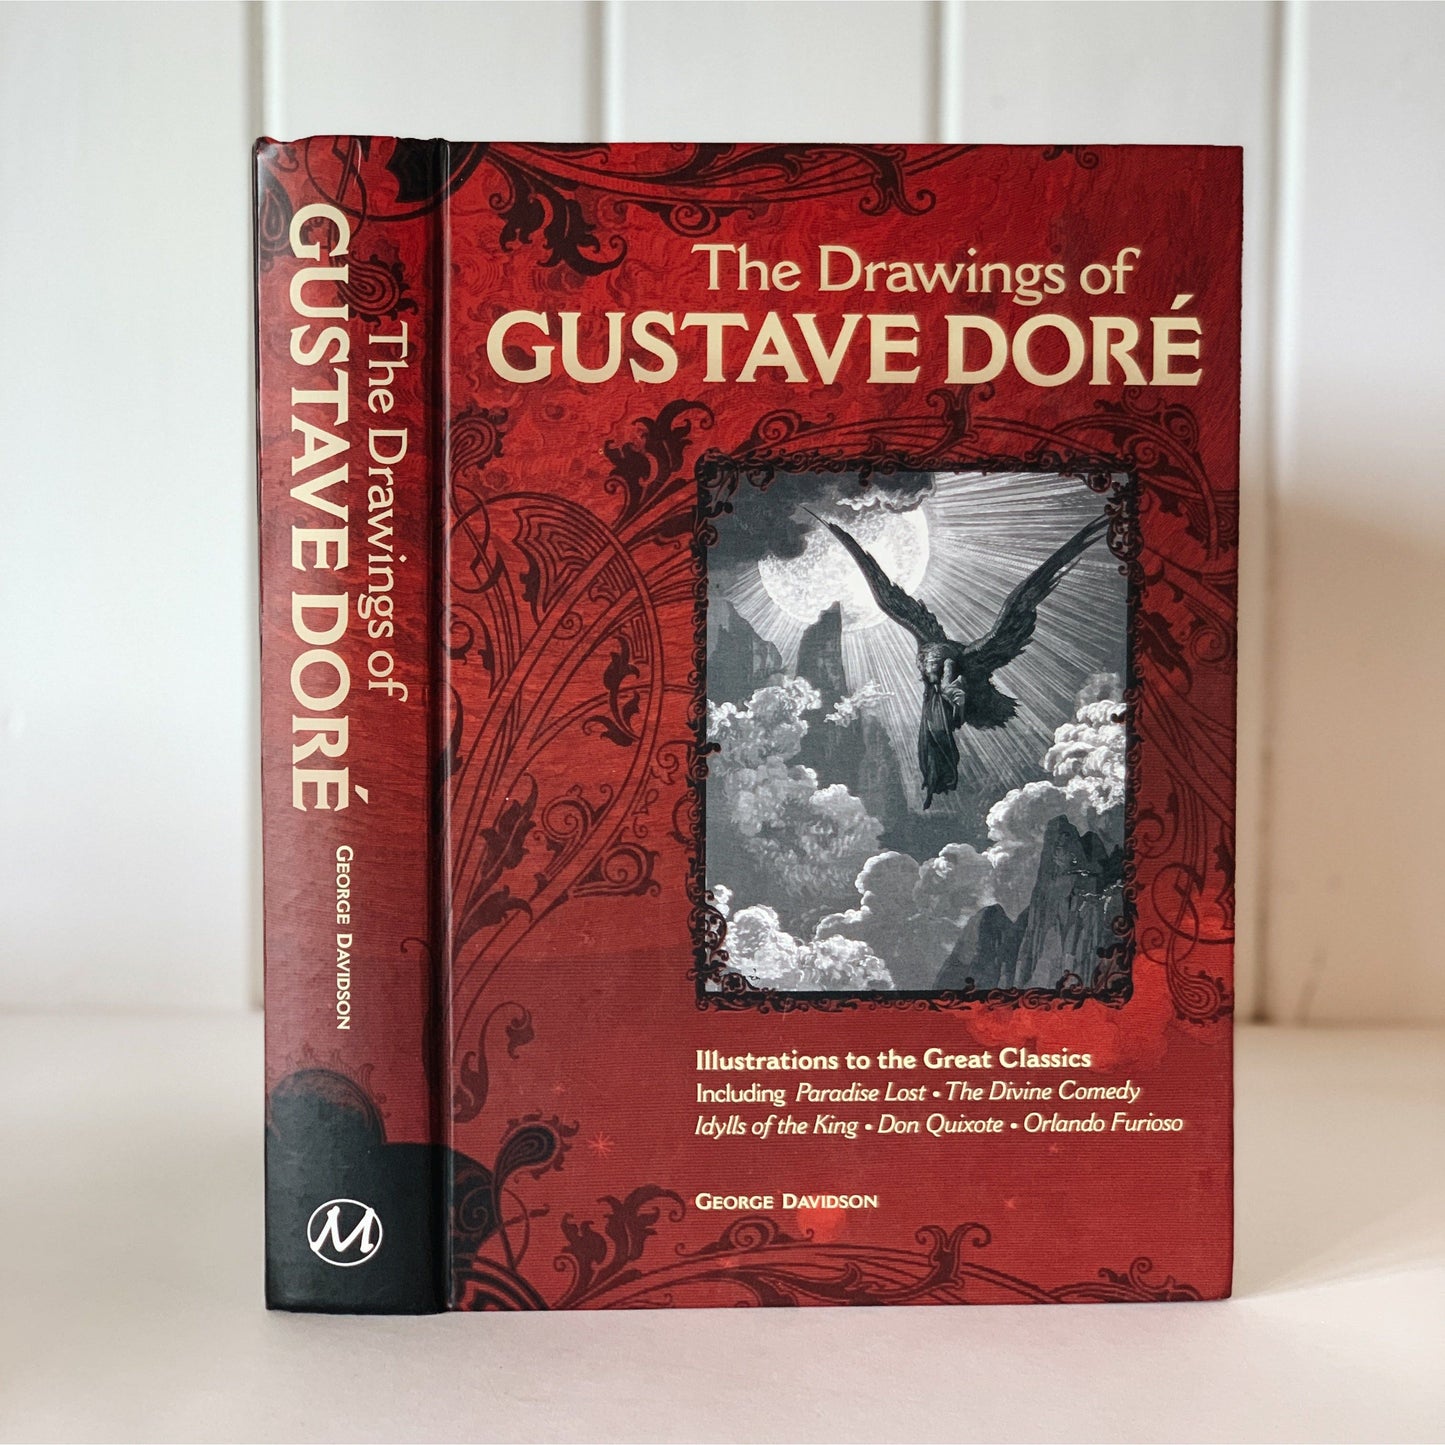 The Drawings of Gustave Dore', 2008, Illustrations to the Great Classics, Coffee Table Book